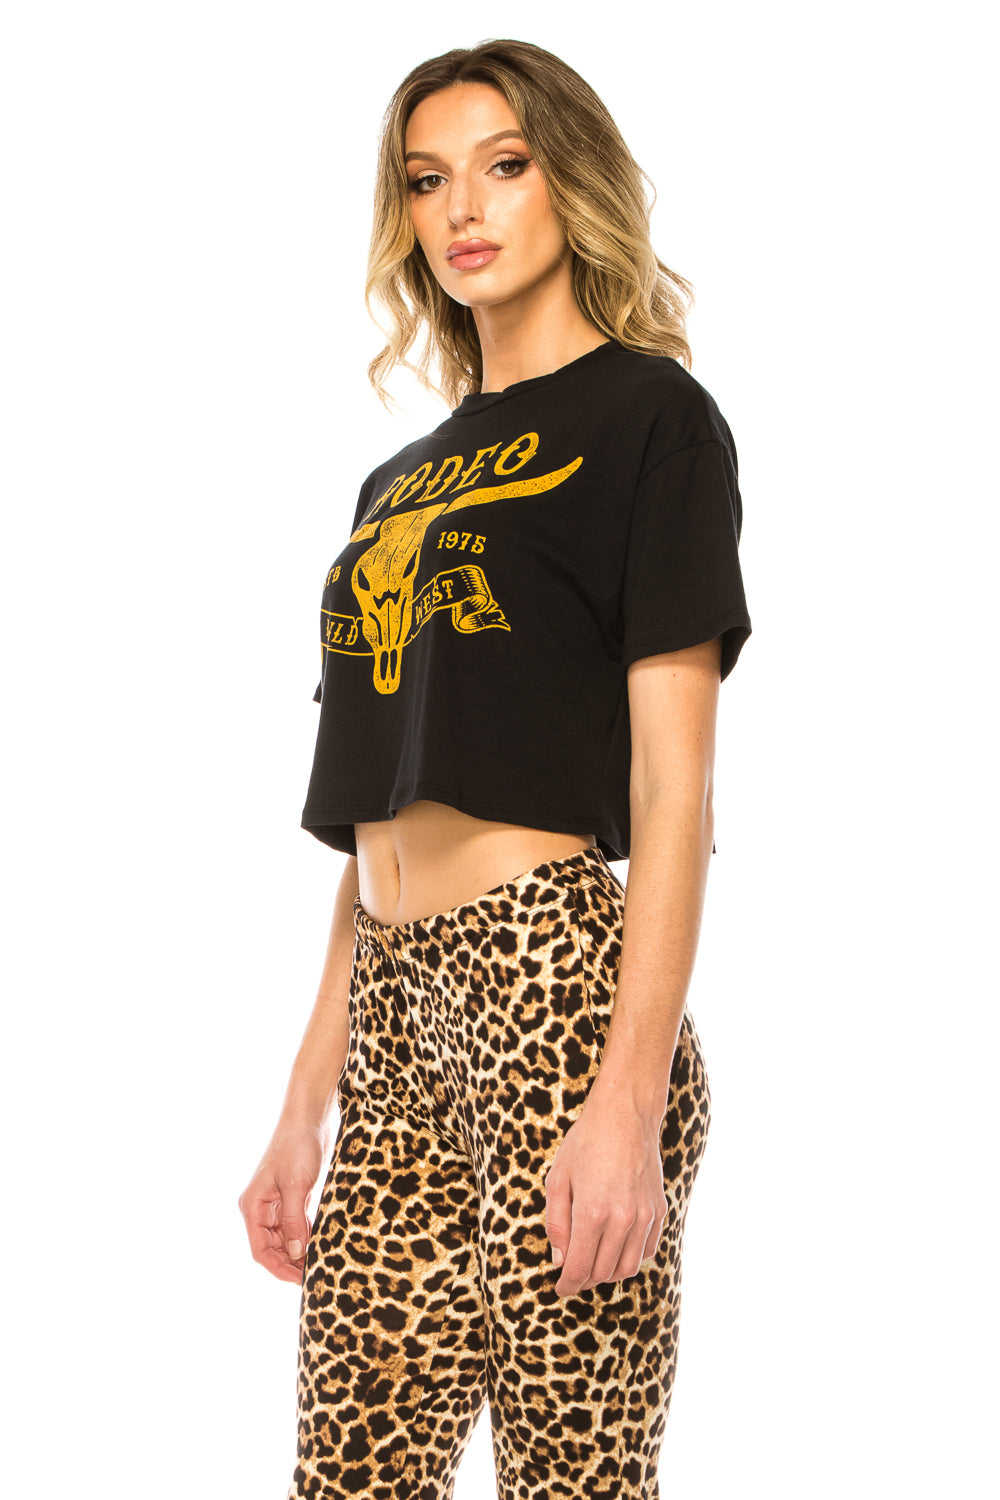 RODEO SHORT SLEEVE CROP TOP - Trailsclothing.com